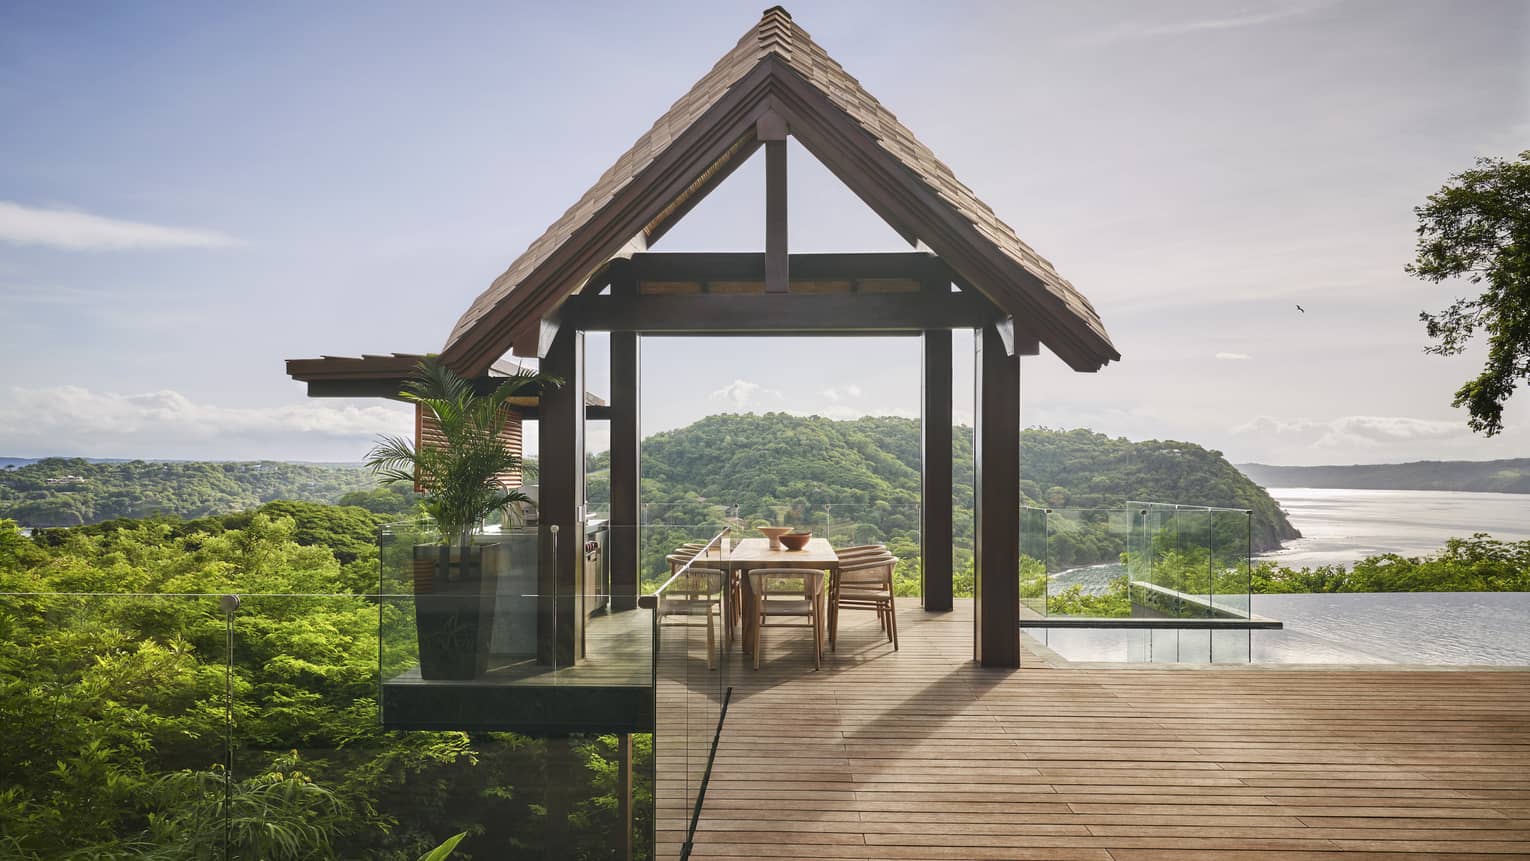 Dining table sits under an open-air wooden pavillon, next to a pool and overlooking the sea